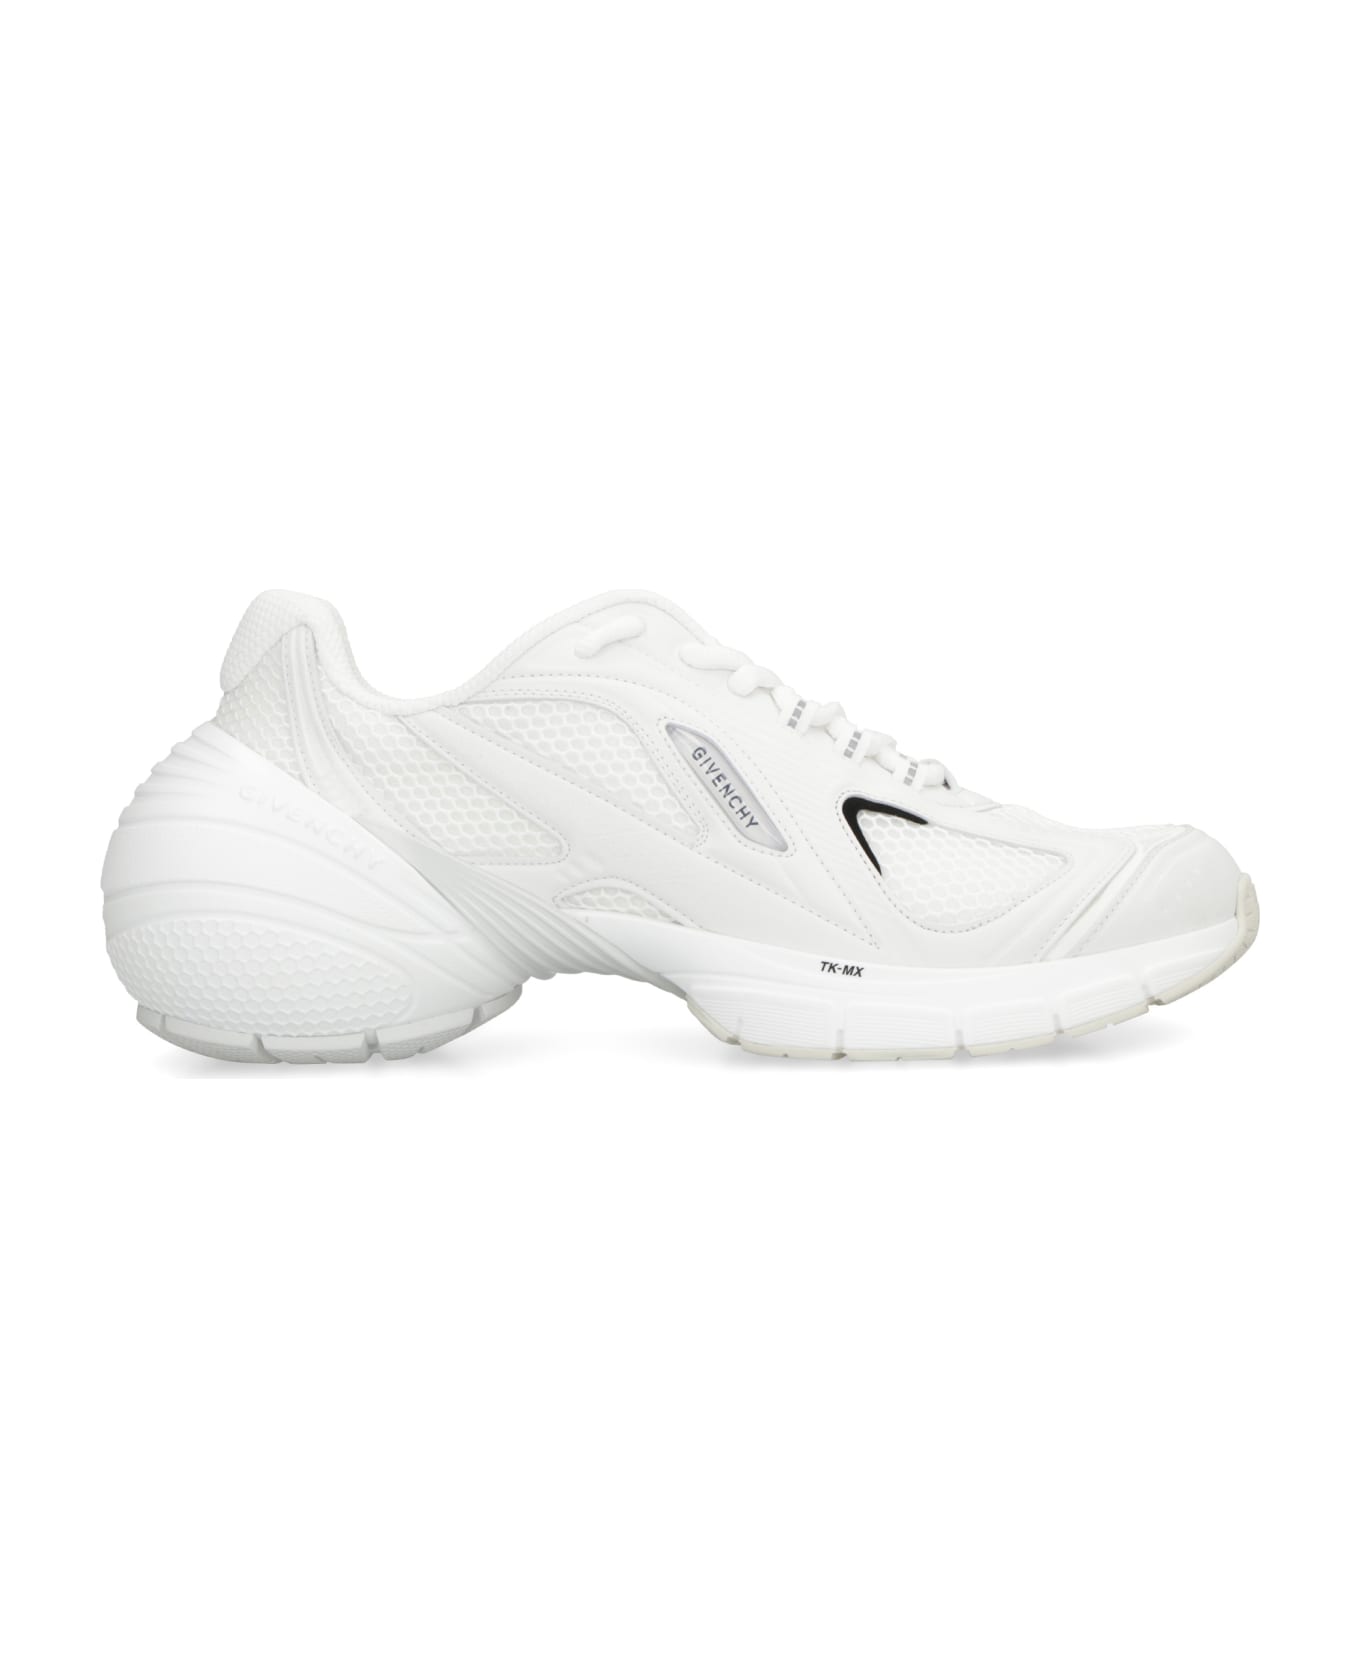 Givenchy Tk-mx Low-top Sneakers - White